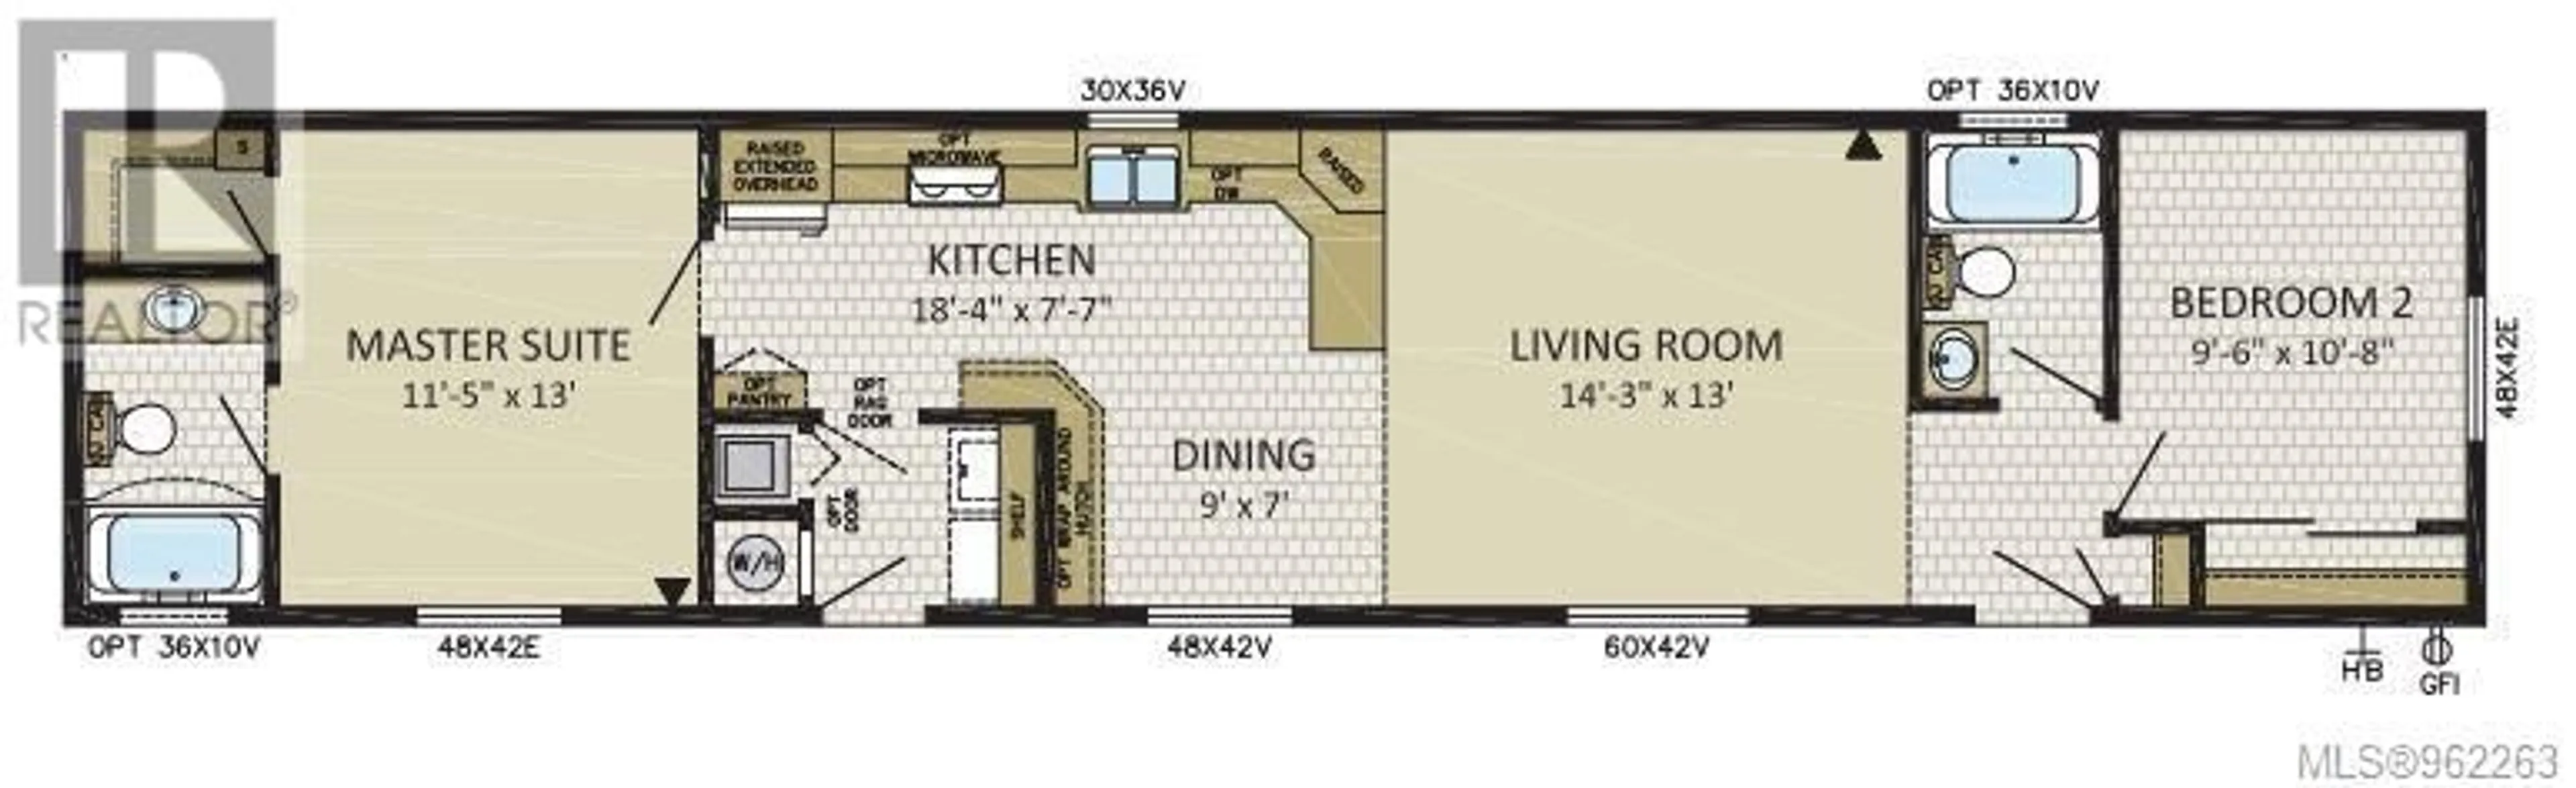 Floor plan for 485 Orca Cres, Ucluelet British Columbia V0R3A0